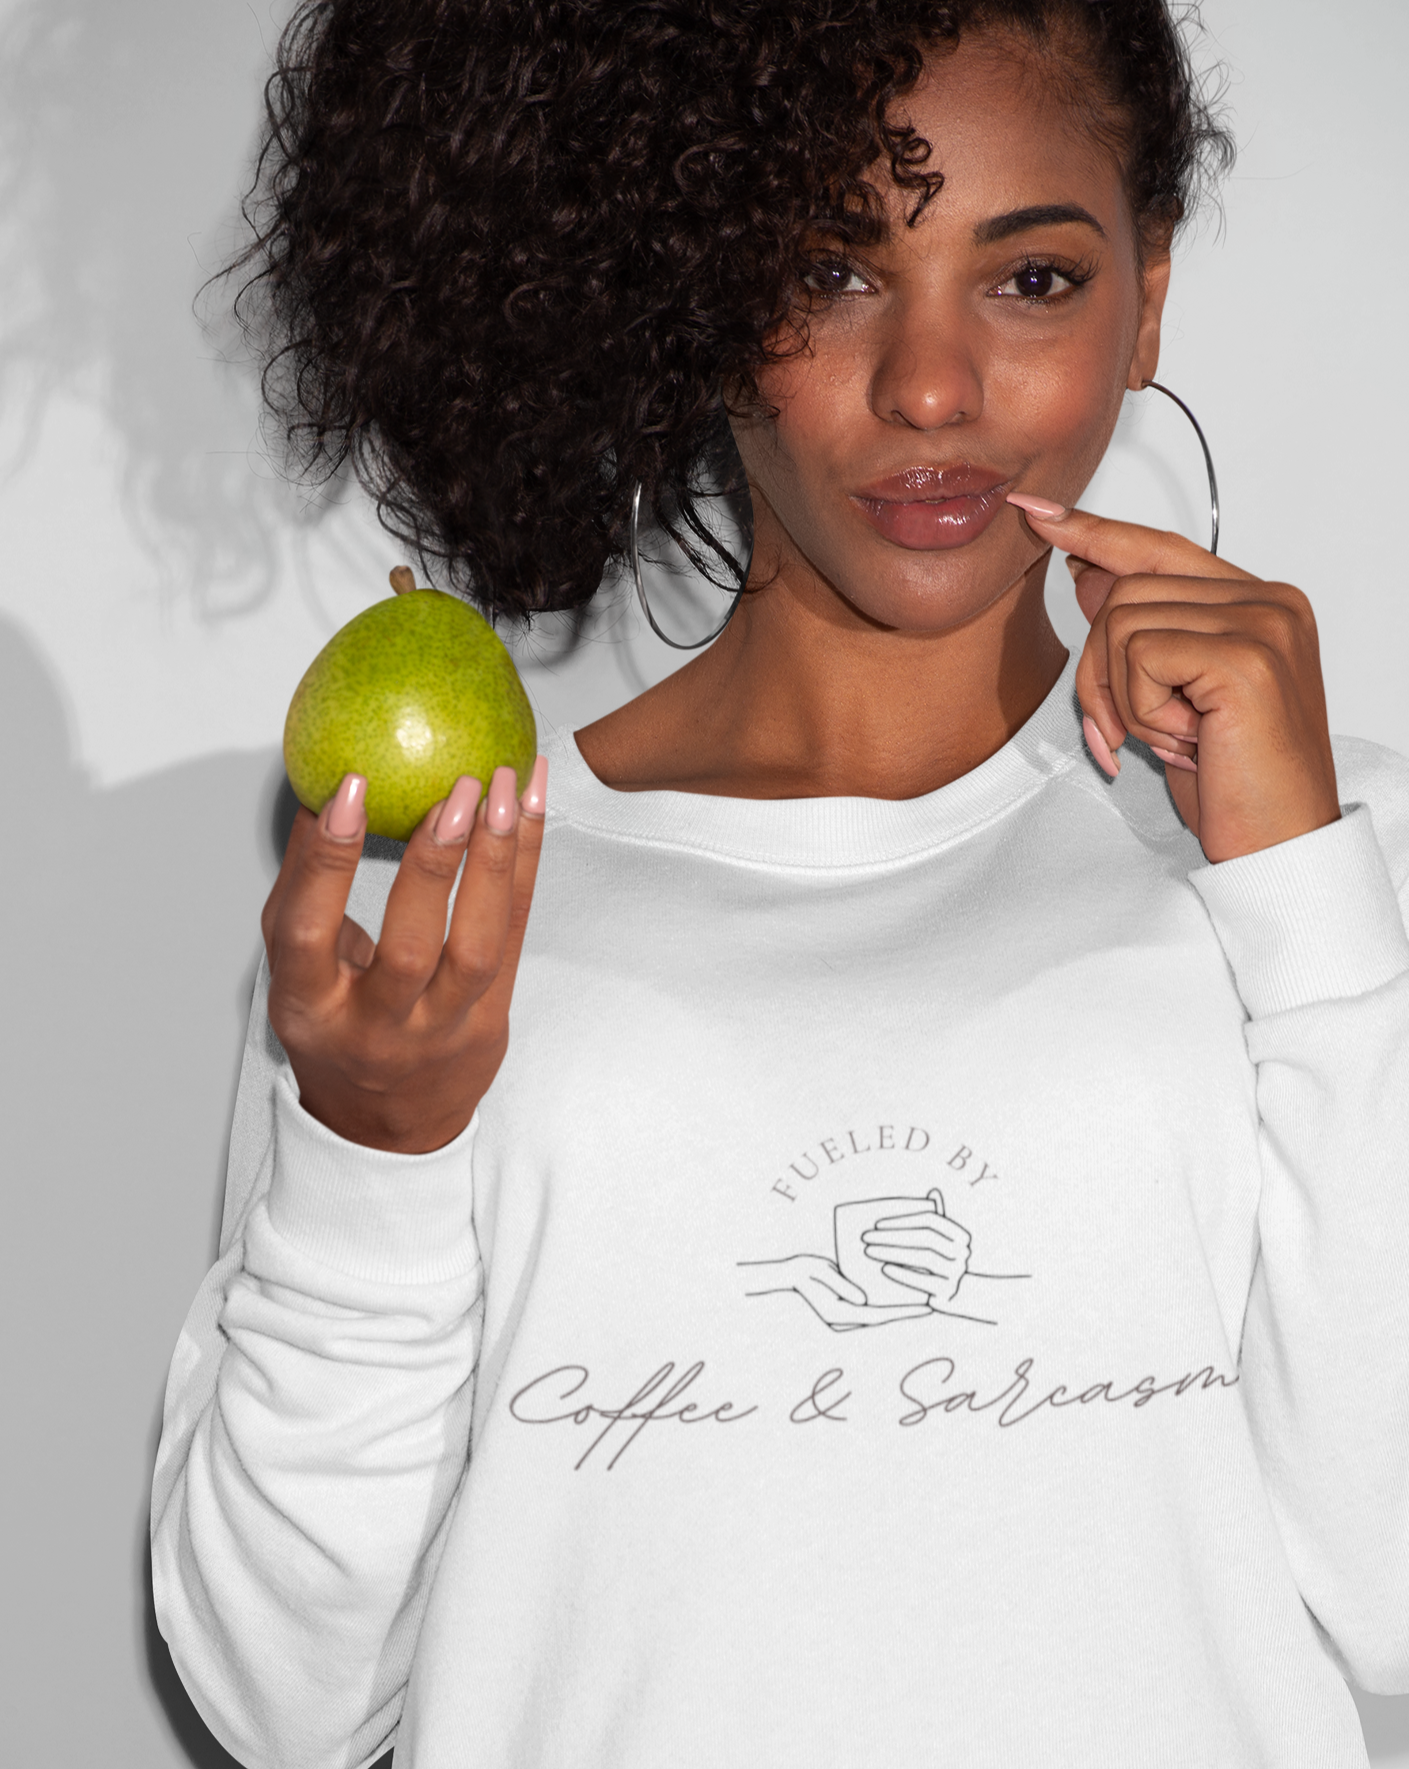 Fueled by coffee and sarcasm, that's all there is to it. Show off your love for coffee and sass with this crewneck sweatshirt. Designed with a soft cotton, you can stay comfortable on your way to the coffee shop with a whole bunch of attitude. 